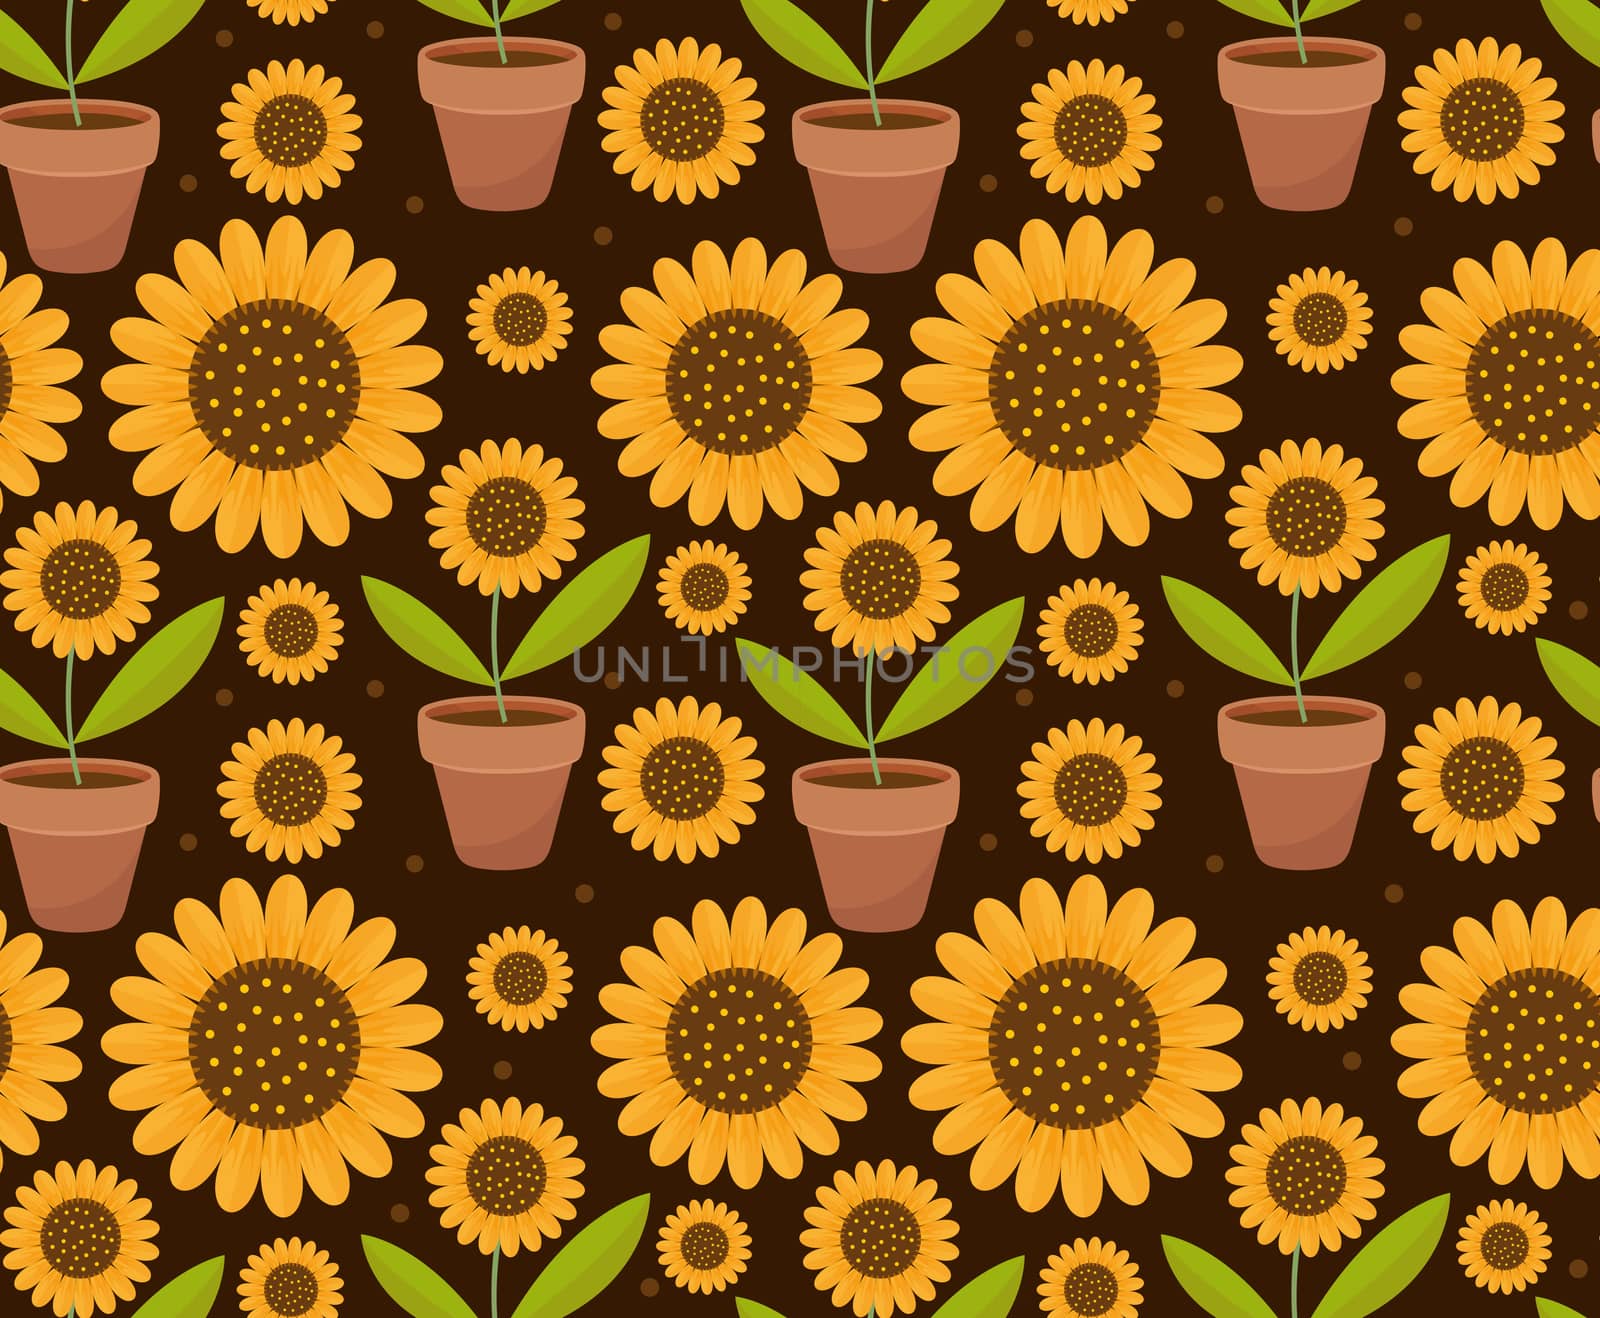 Summer seamless pattern with yellow sunflower flowers. Village endless background, repeating texture. illustration. by lucia_fox